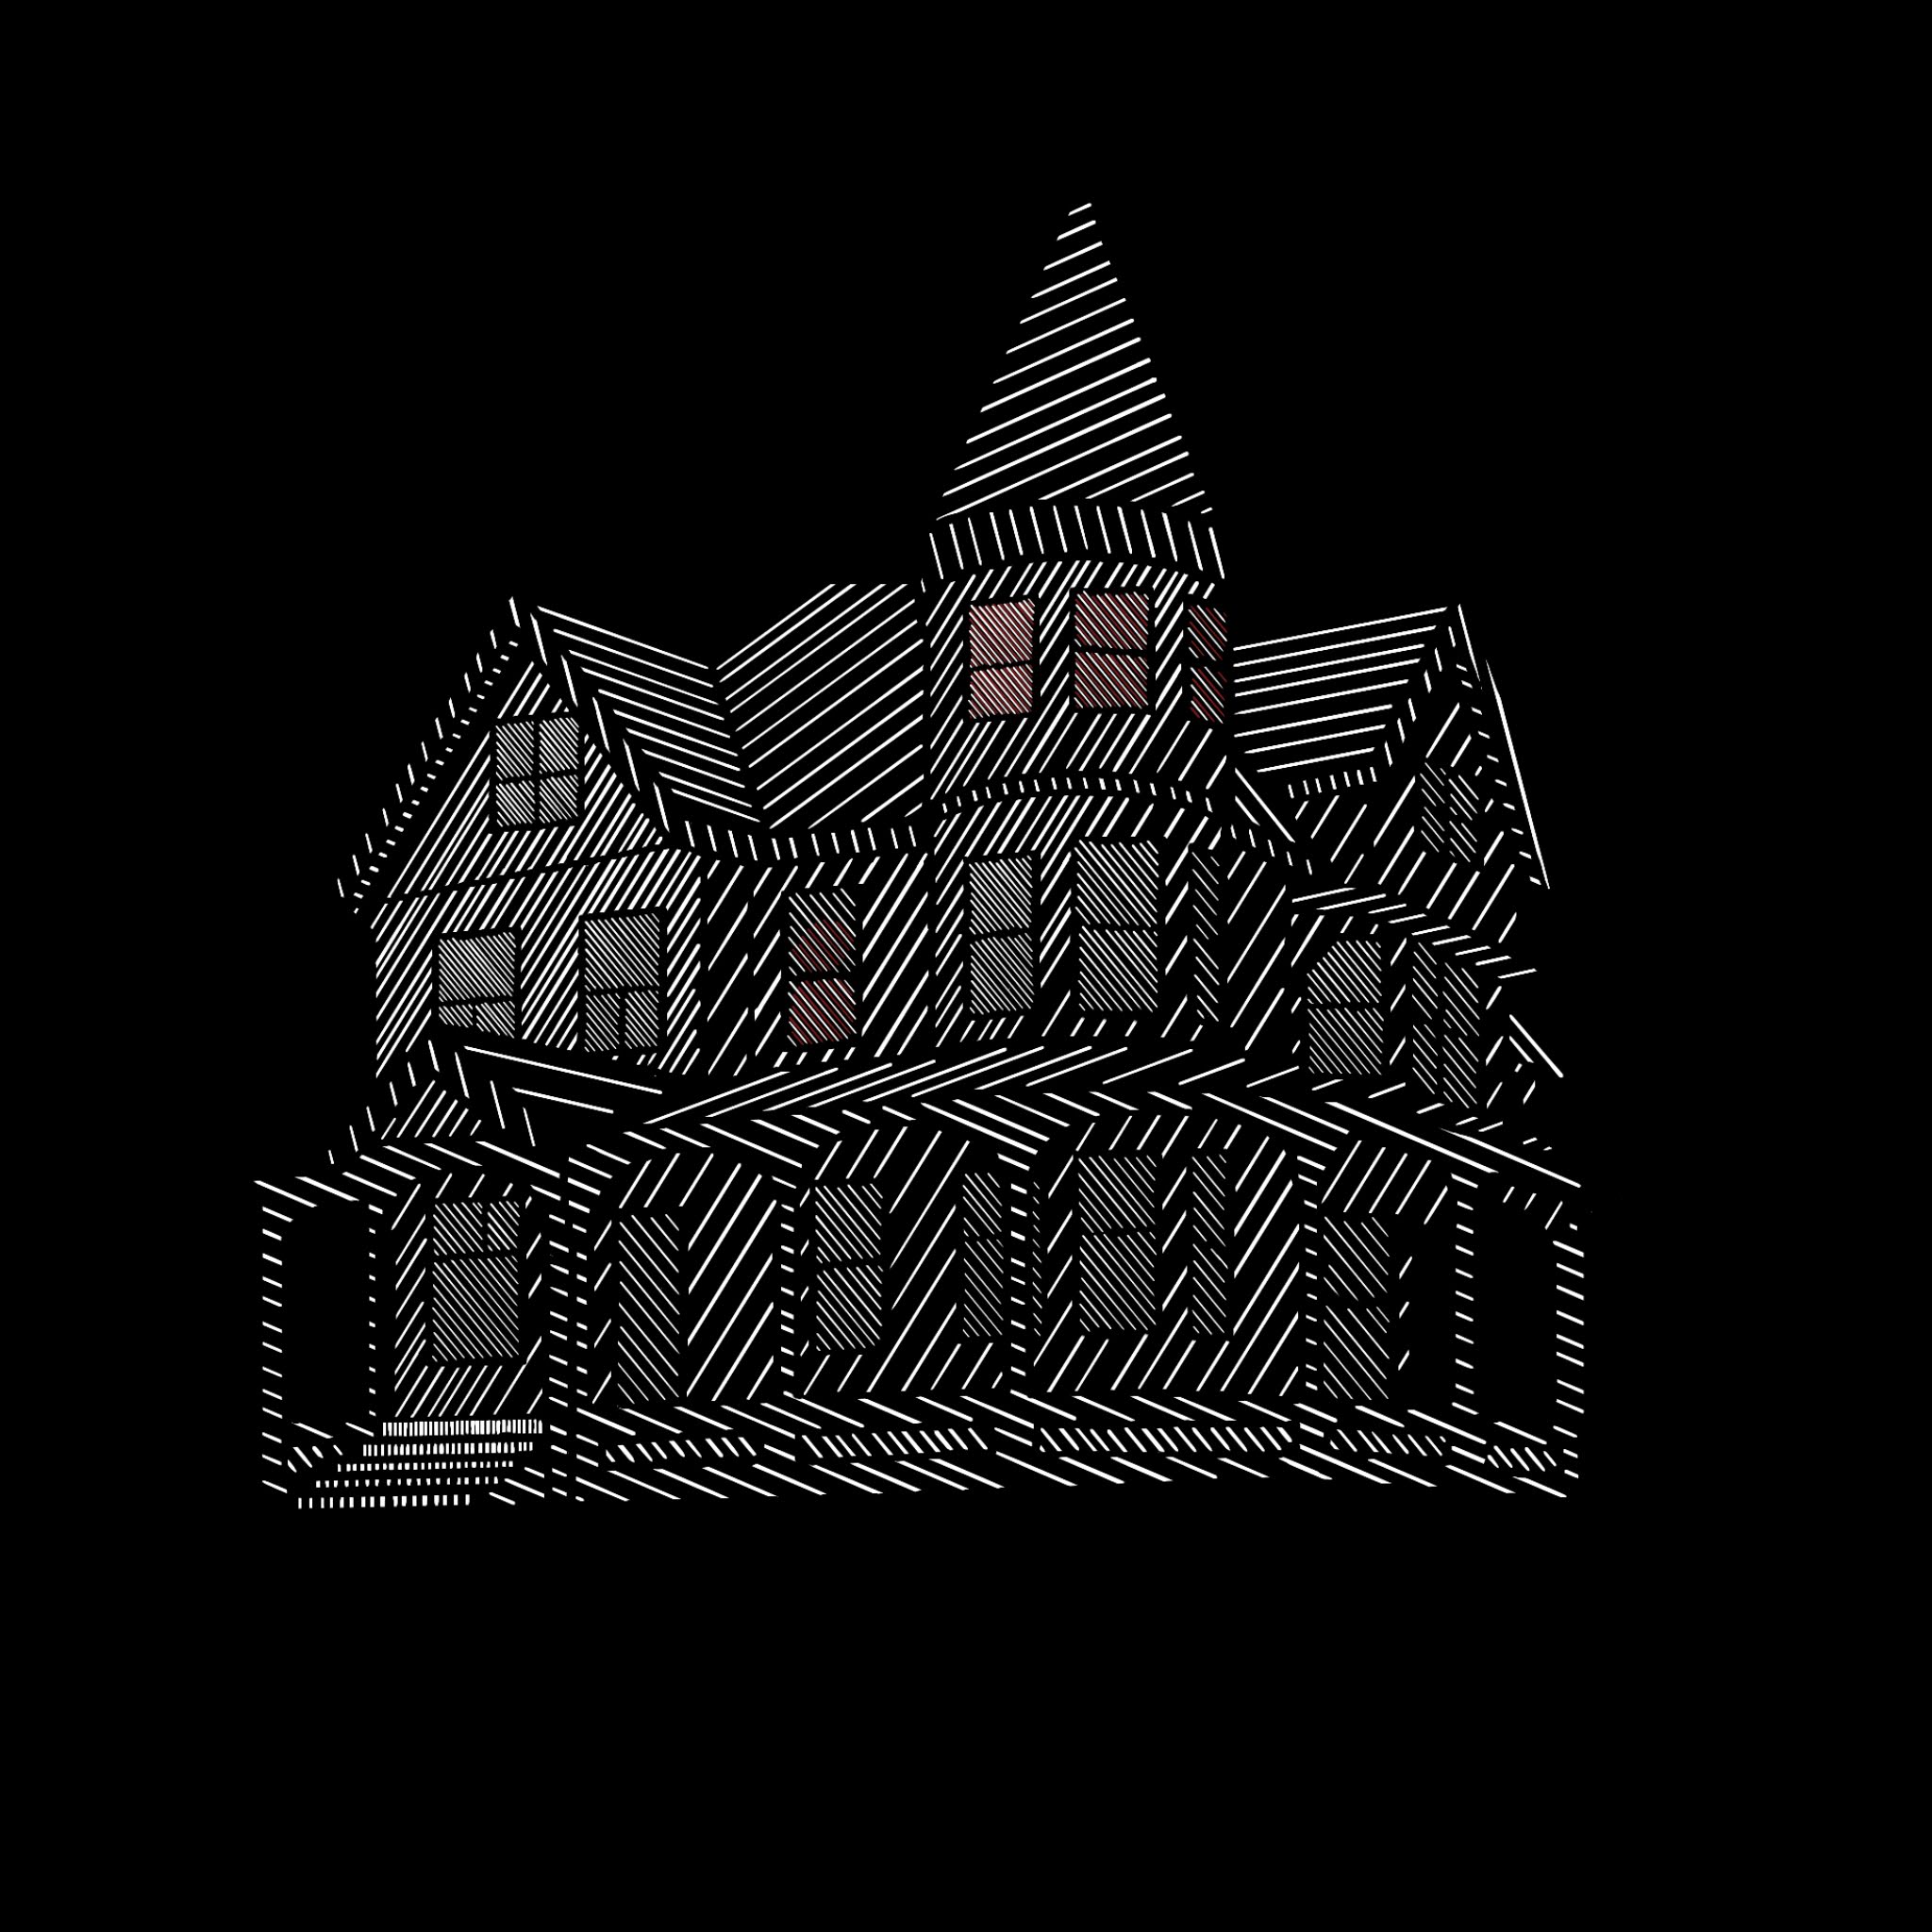 A victorian style house made of linework.